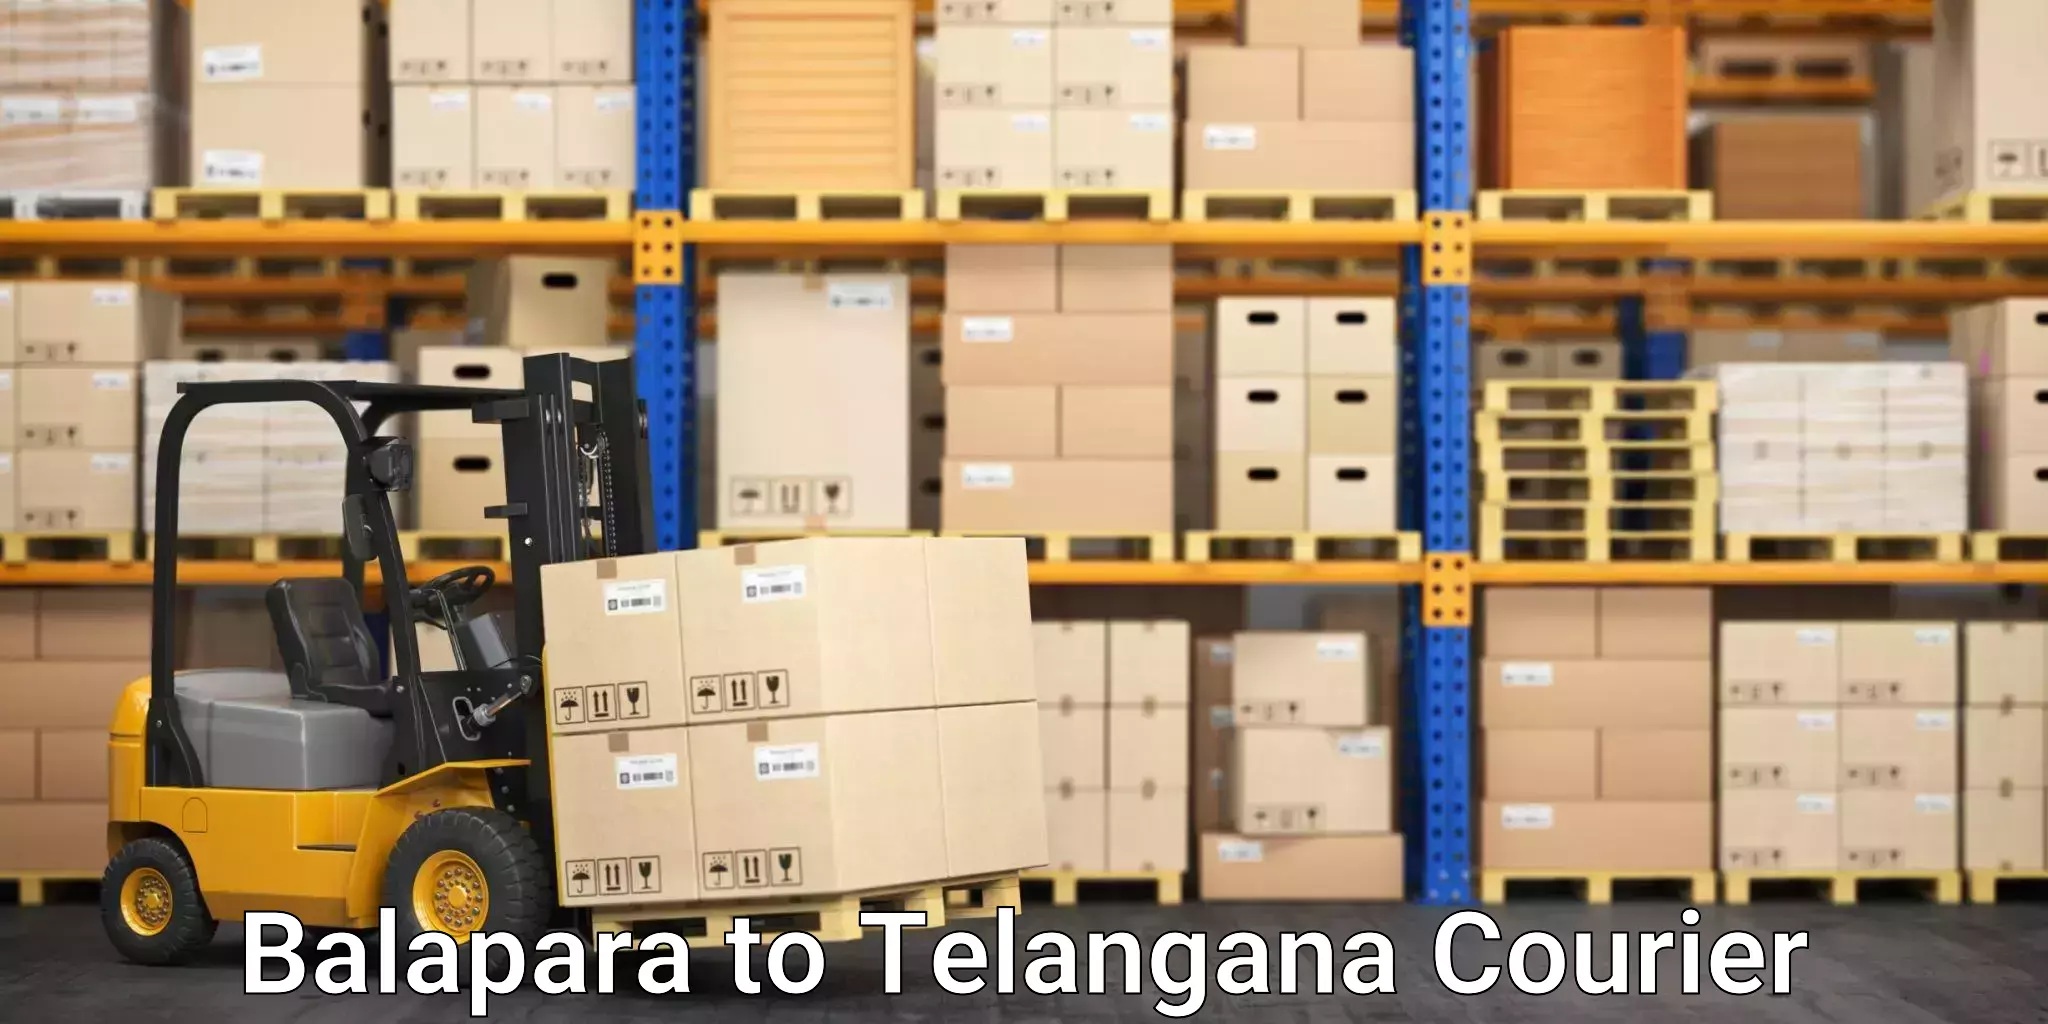 Round-the-clock parcel delivery Balapara to Tiryani